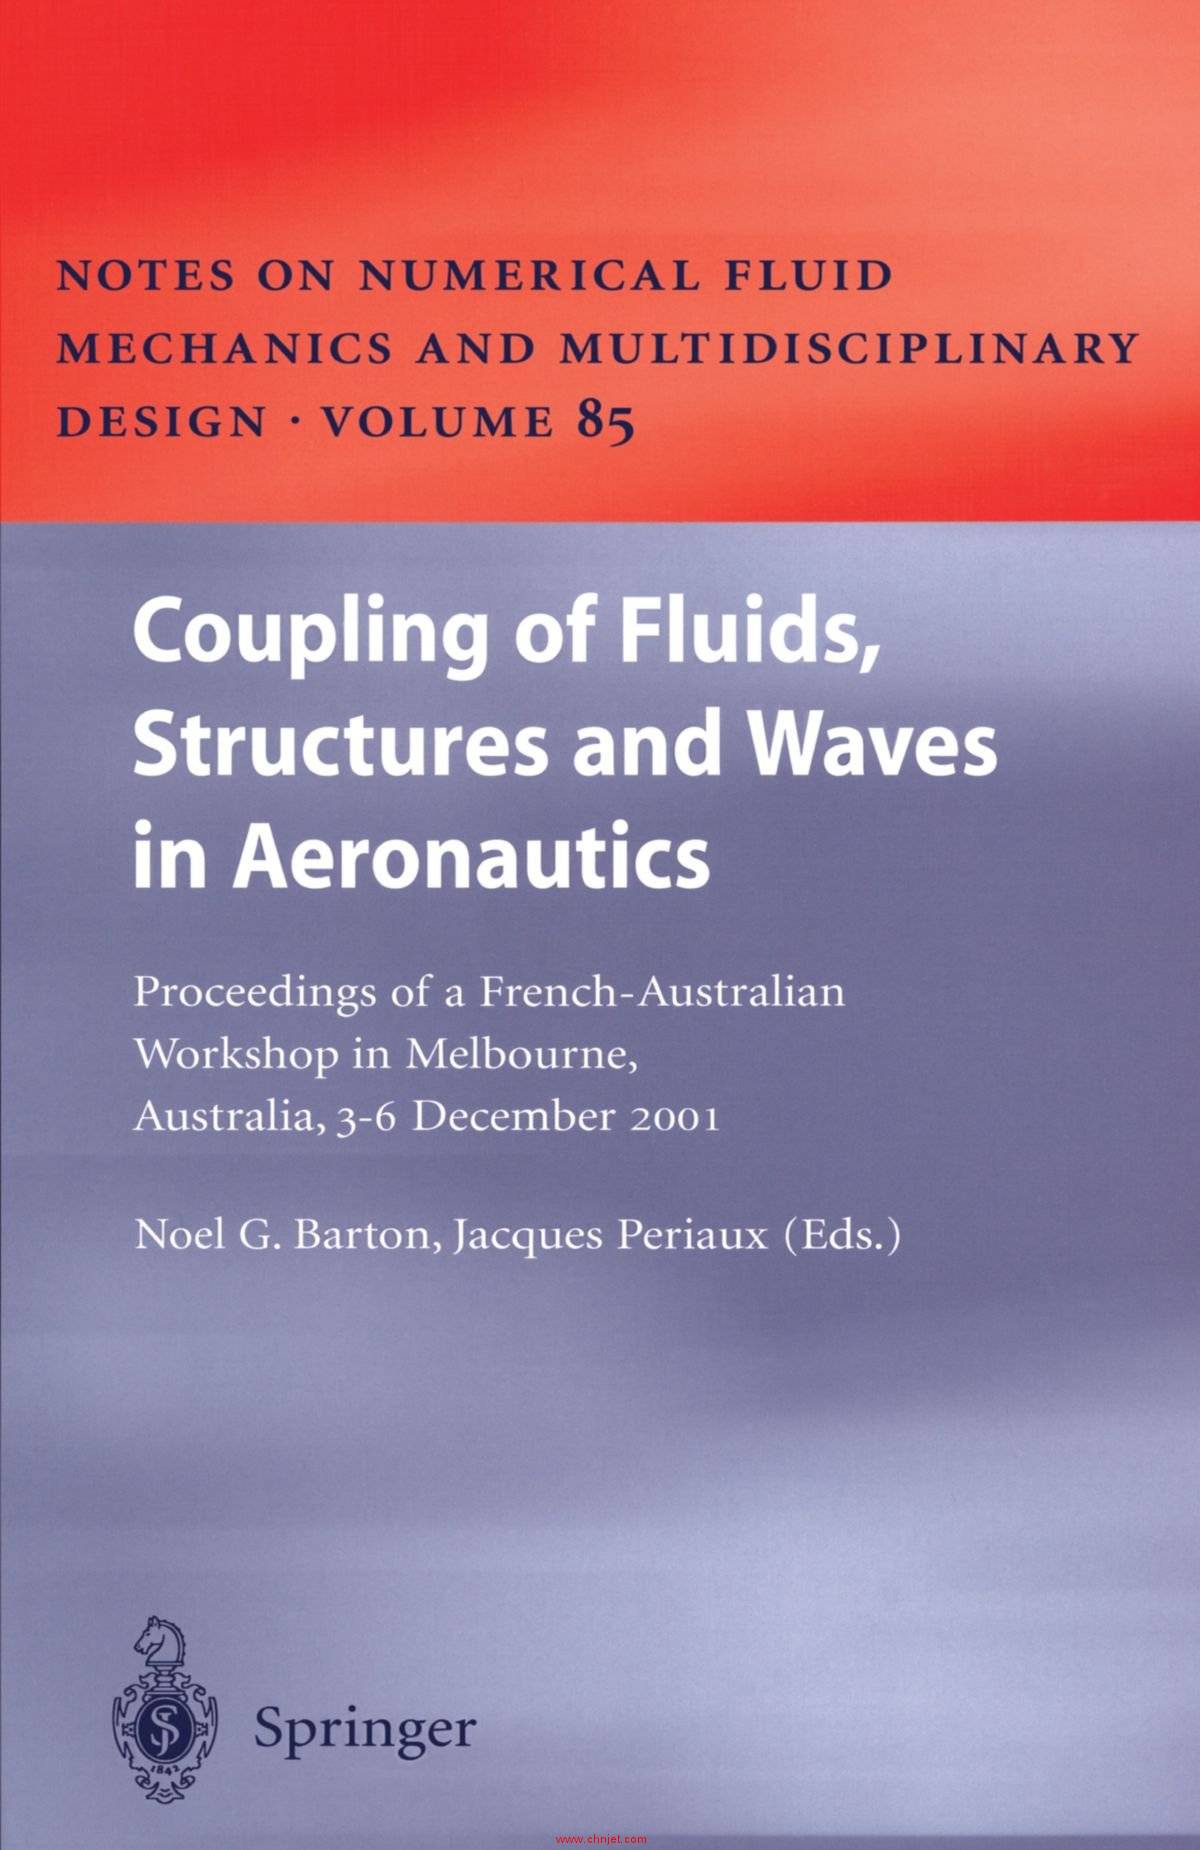 《Coupling of Fluids, Structures and Waves in Aeronautics: Proceedings of a French-Australian Worksh ...